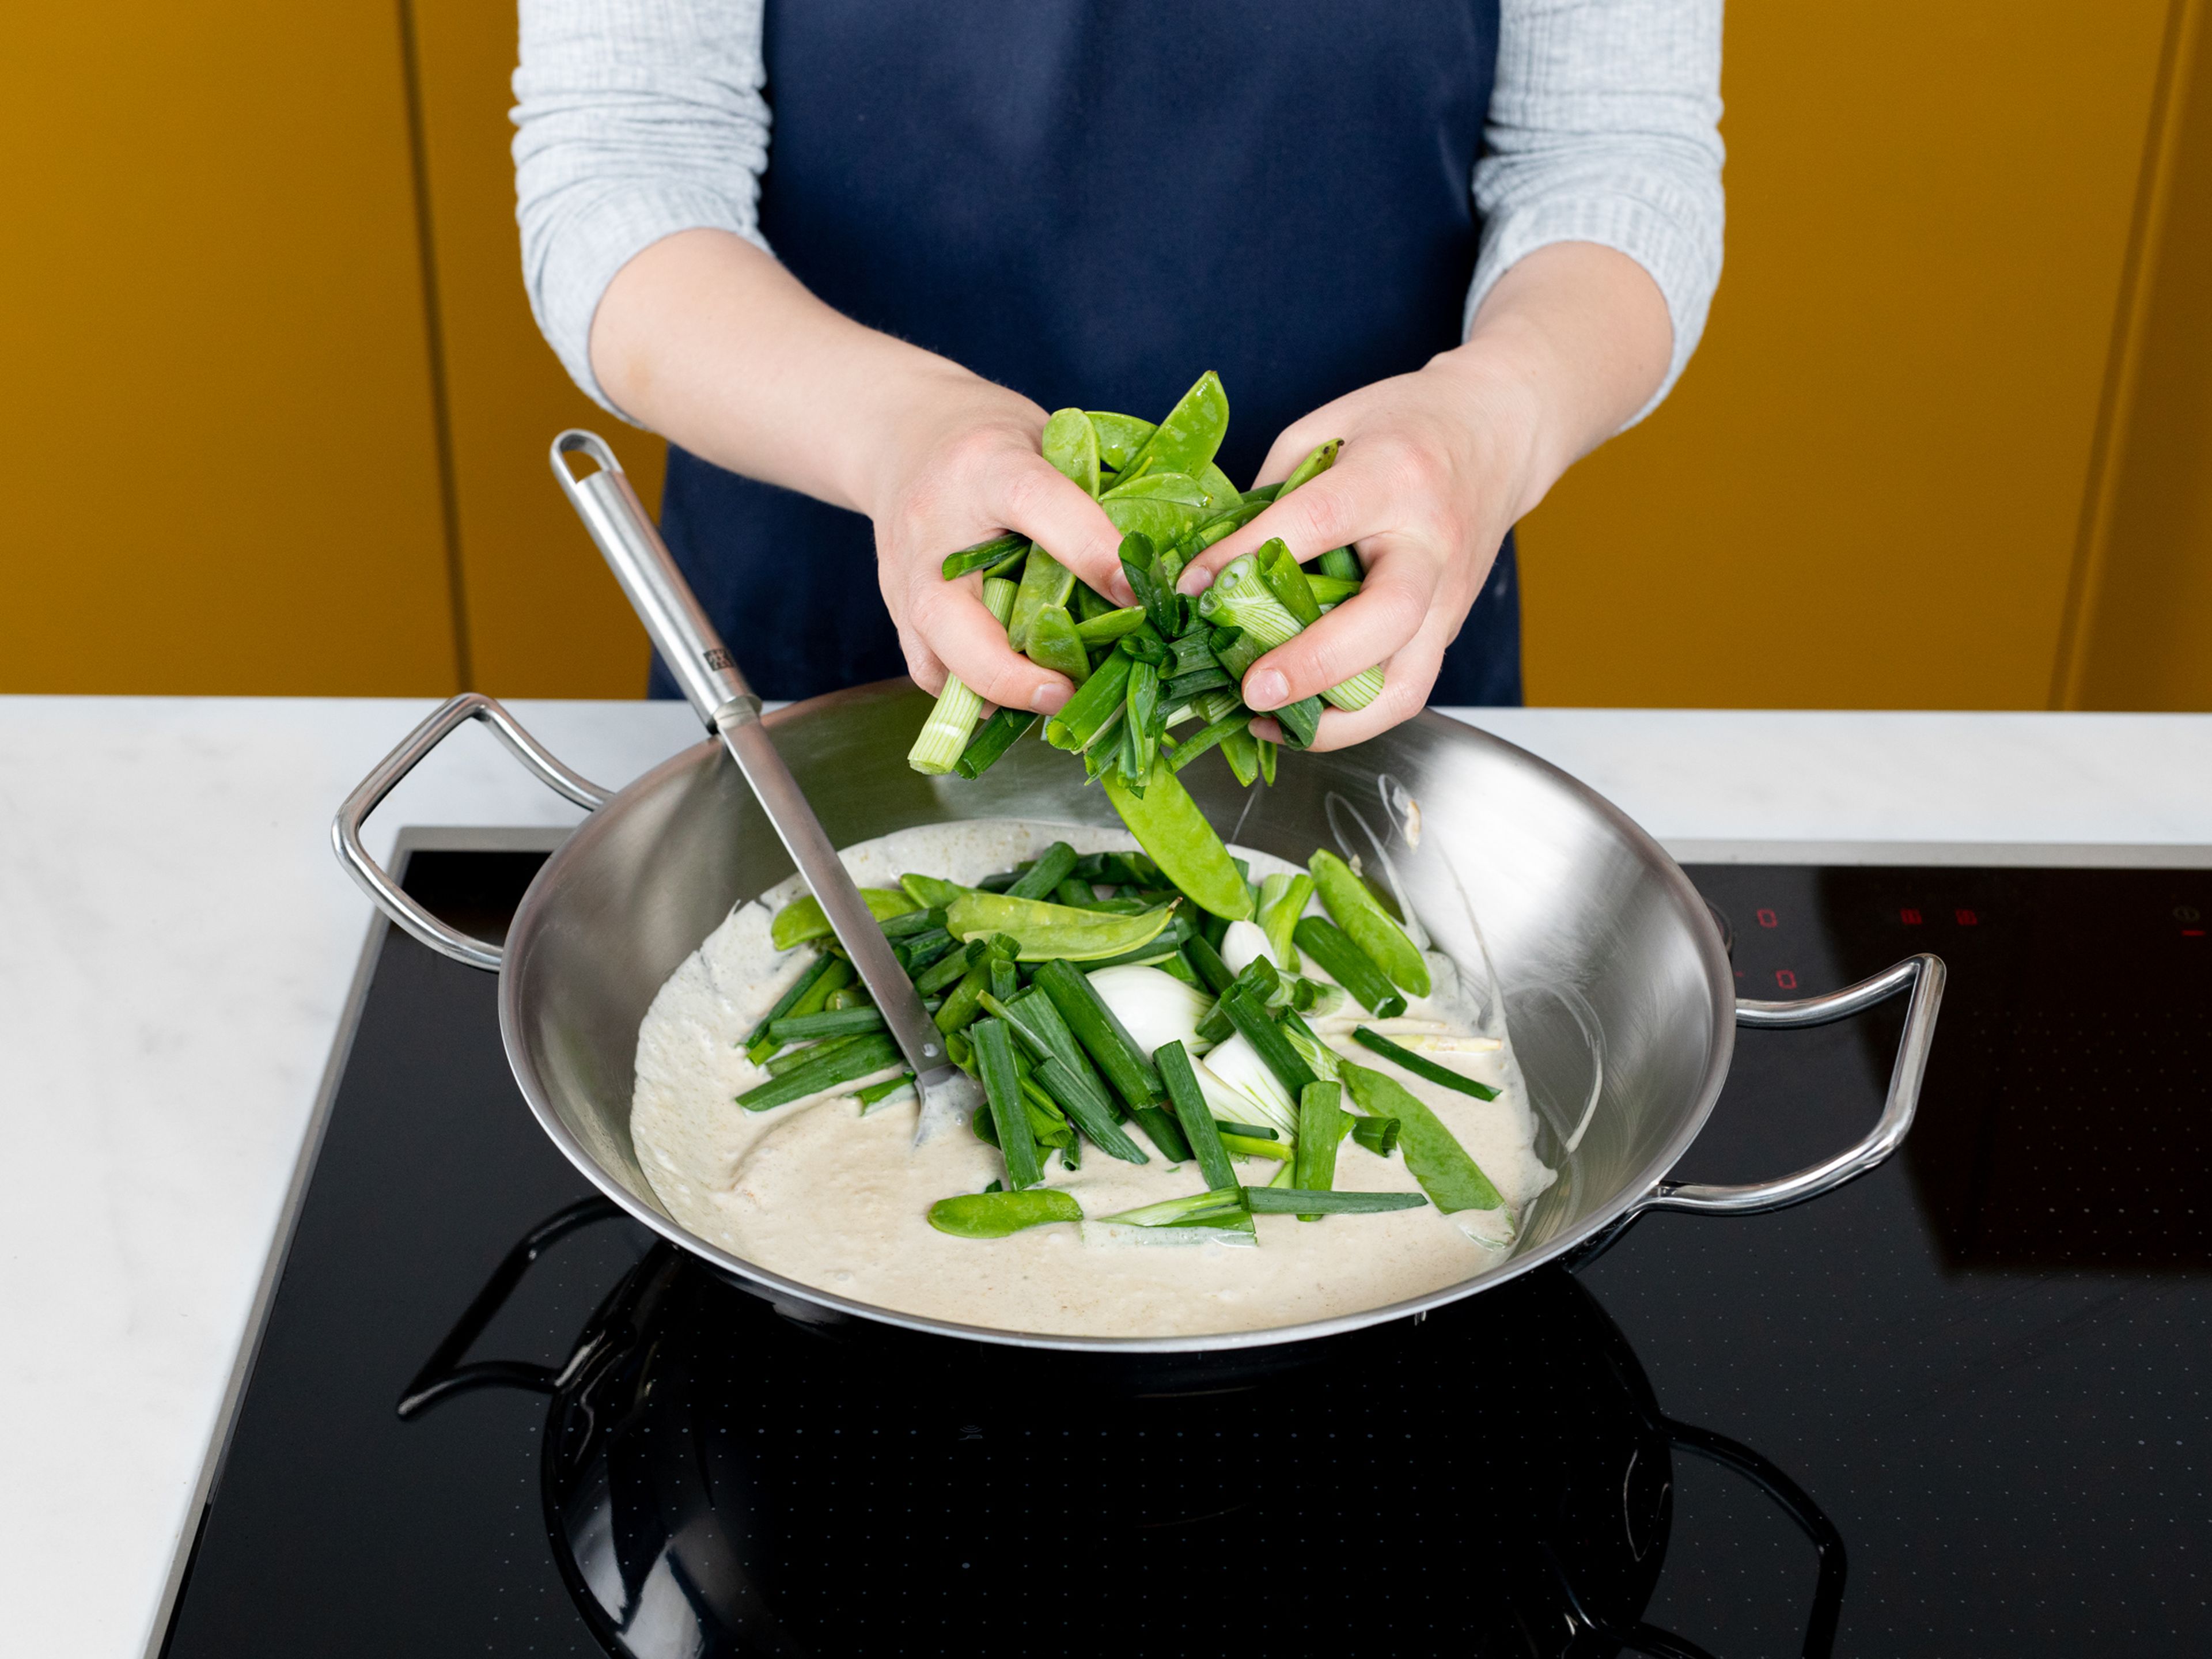 Heat coconut oil in a large pan and sauté garlic and lemongrass. Add green curry paste, cinnamon, and brown sugar, and let bloom for approx. 1 min. Deglaze with rice vinegar and coconut milk. Then add scallions and snap peas and continue cooking for approx. 1 min.